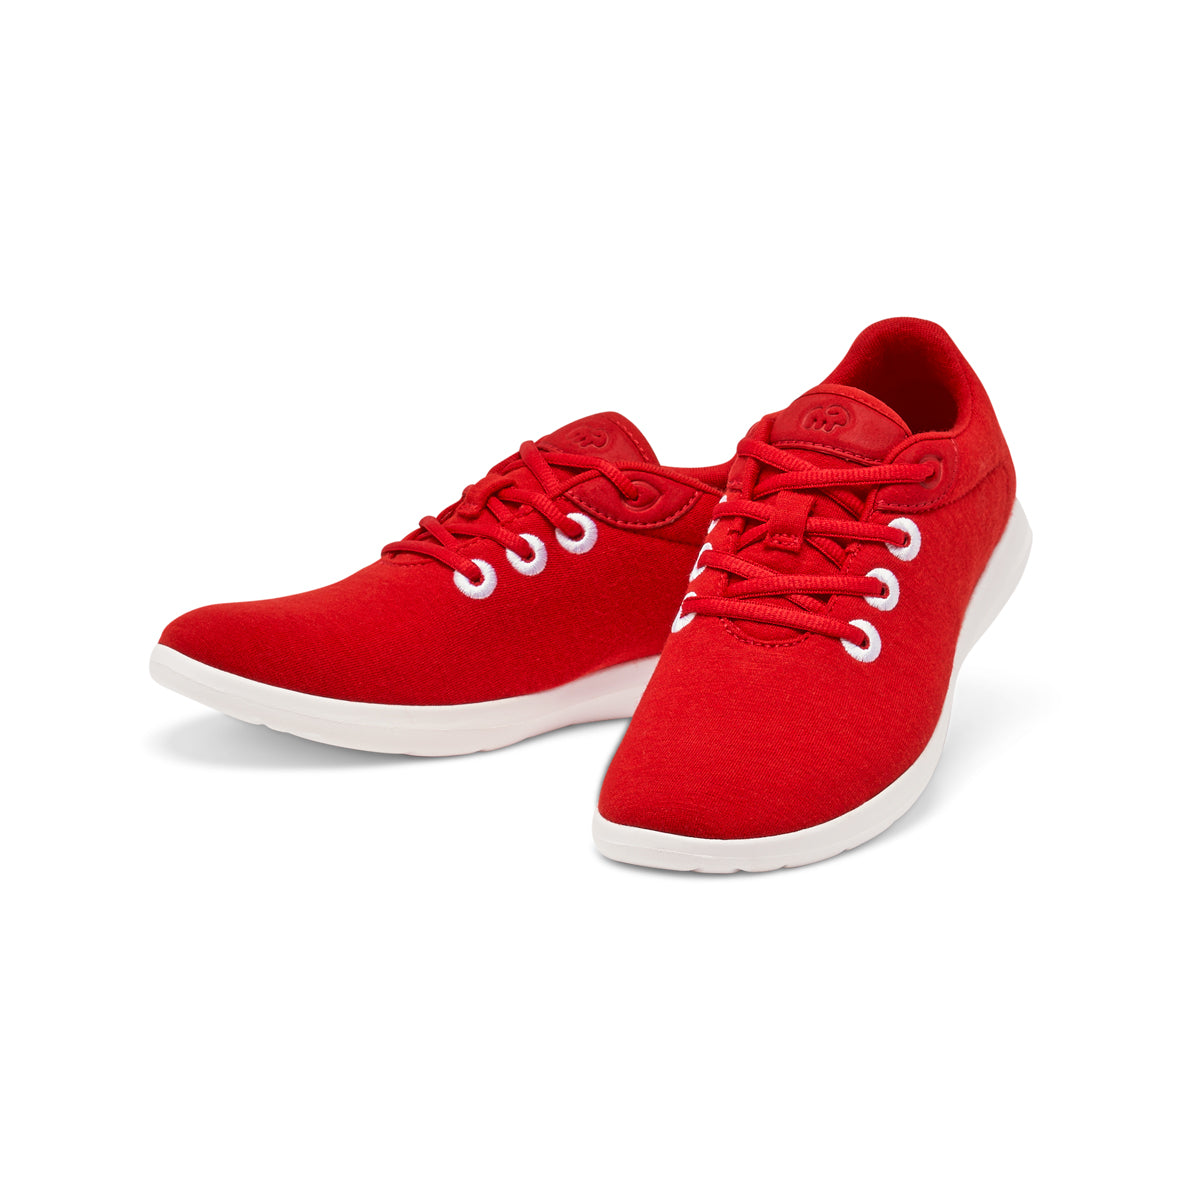 Women's Lace-Ups Red